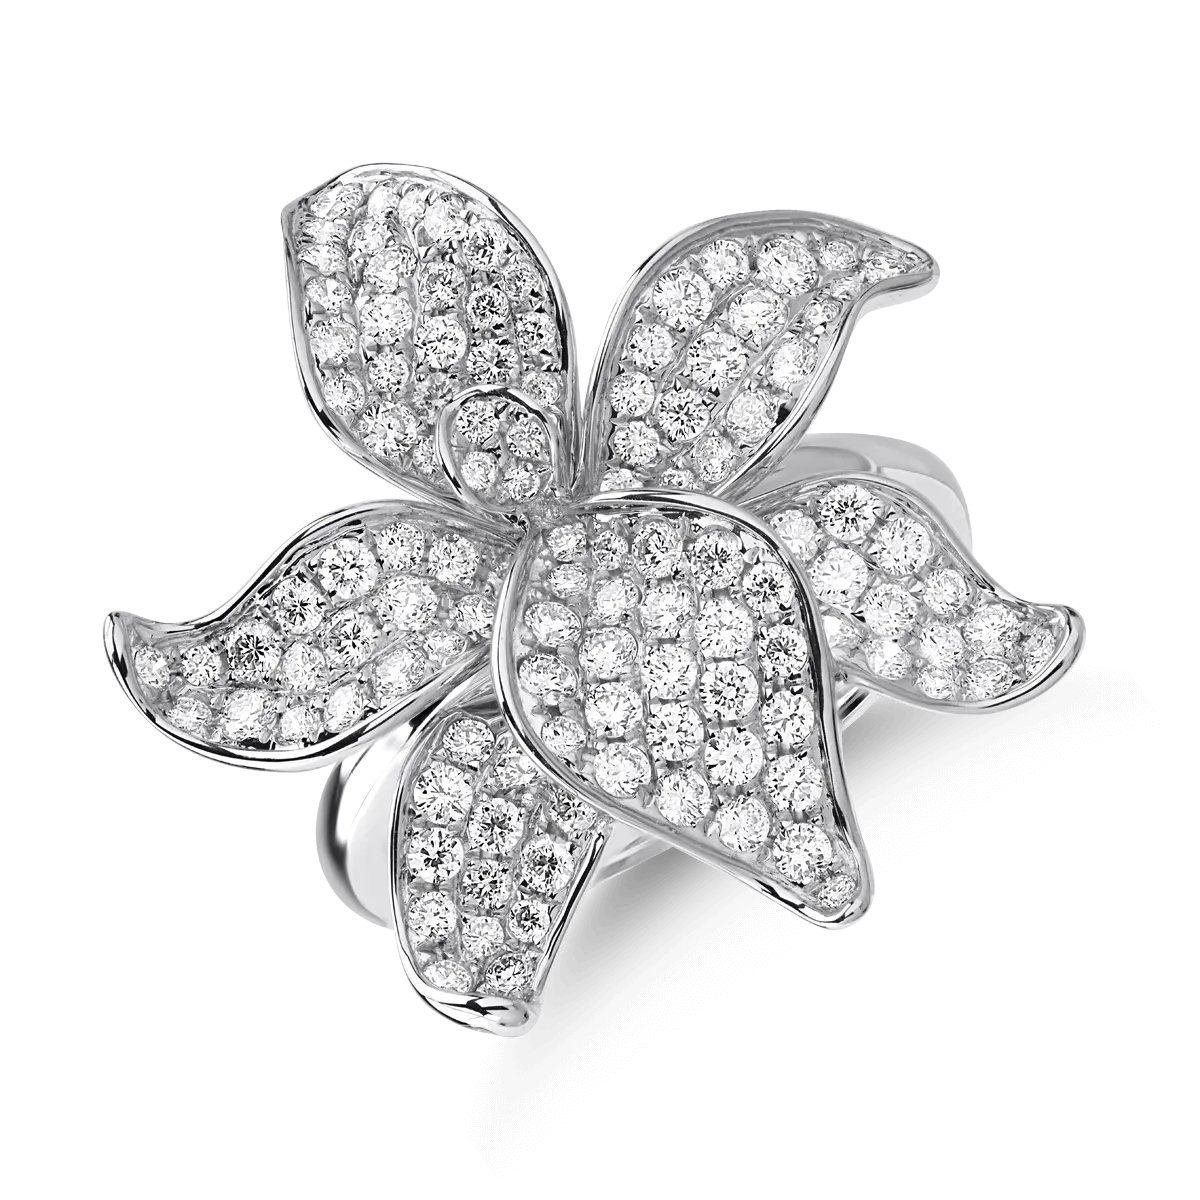 18K white gold flower ring with diamonds of 1.3ct